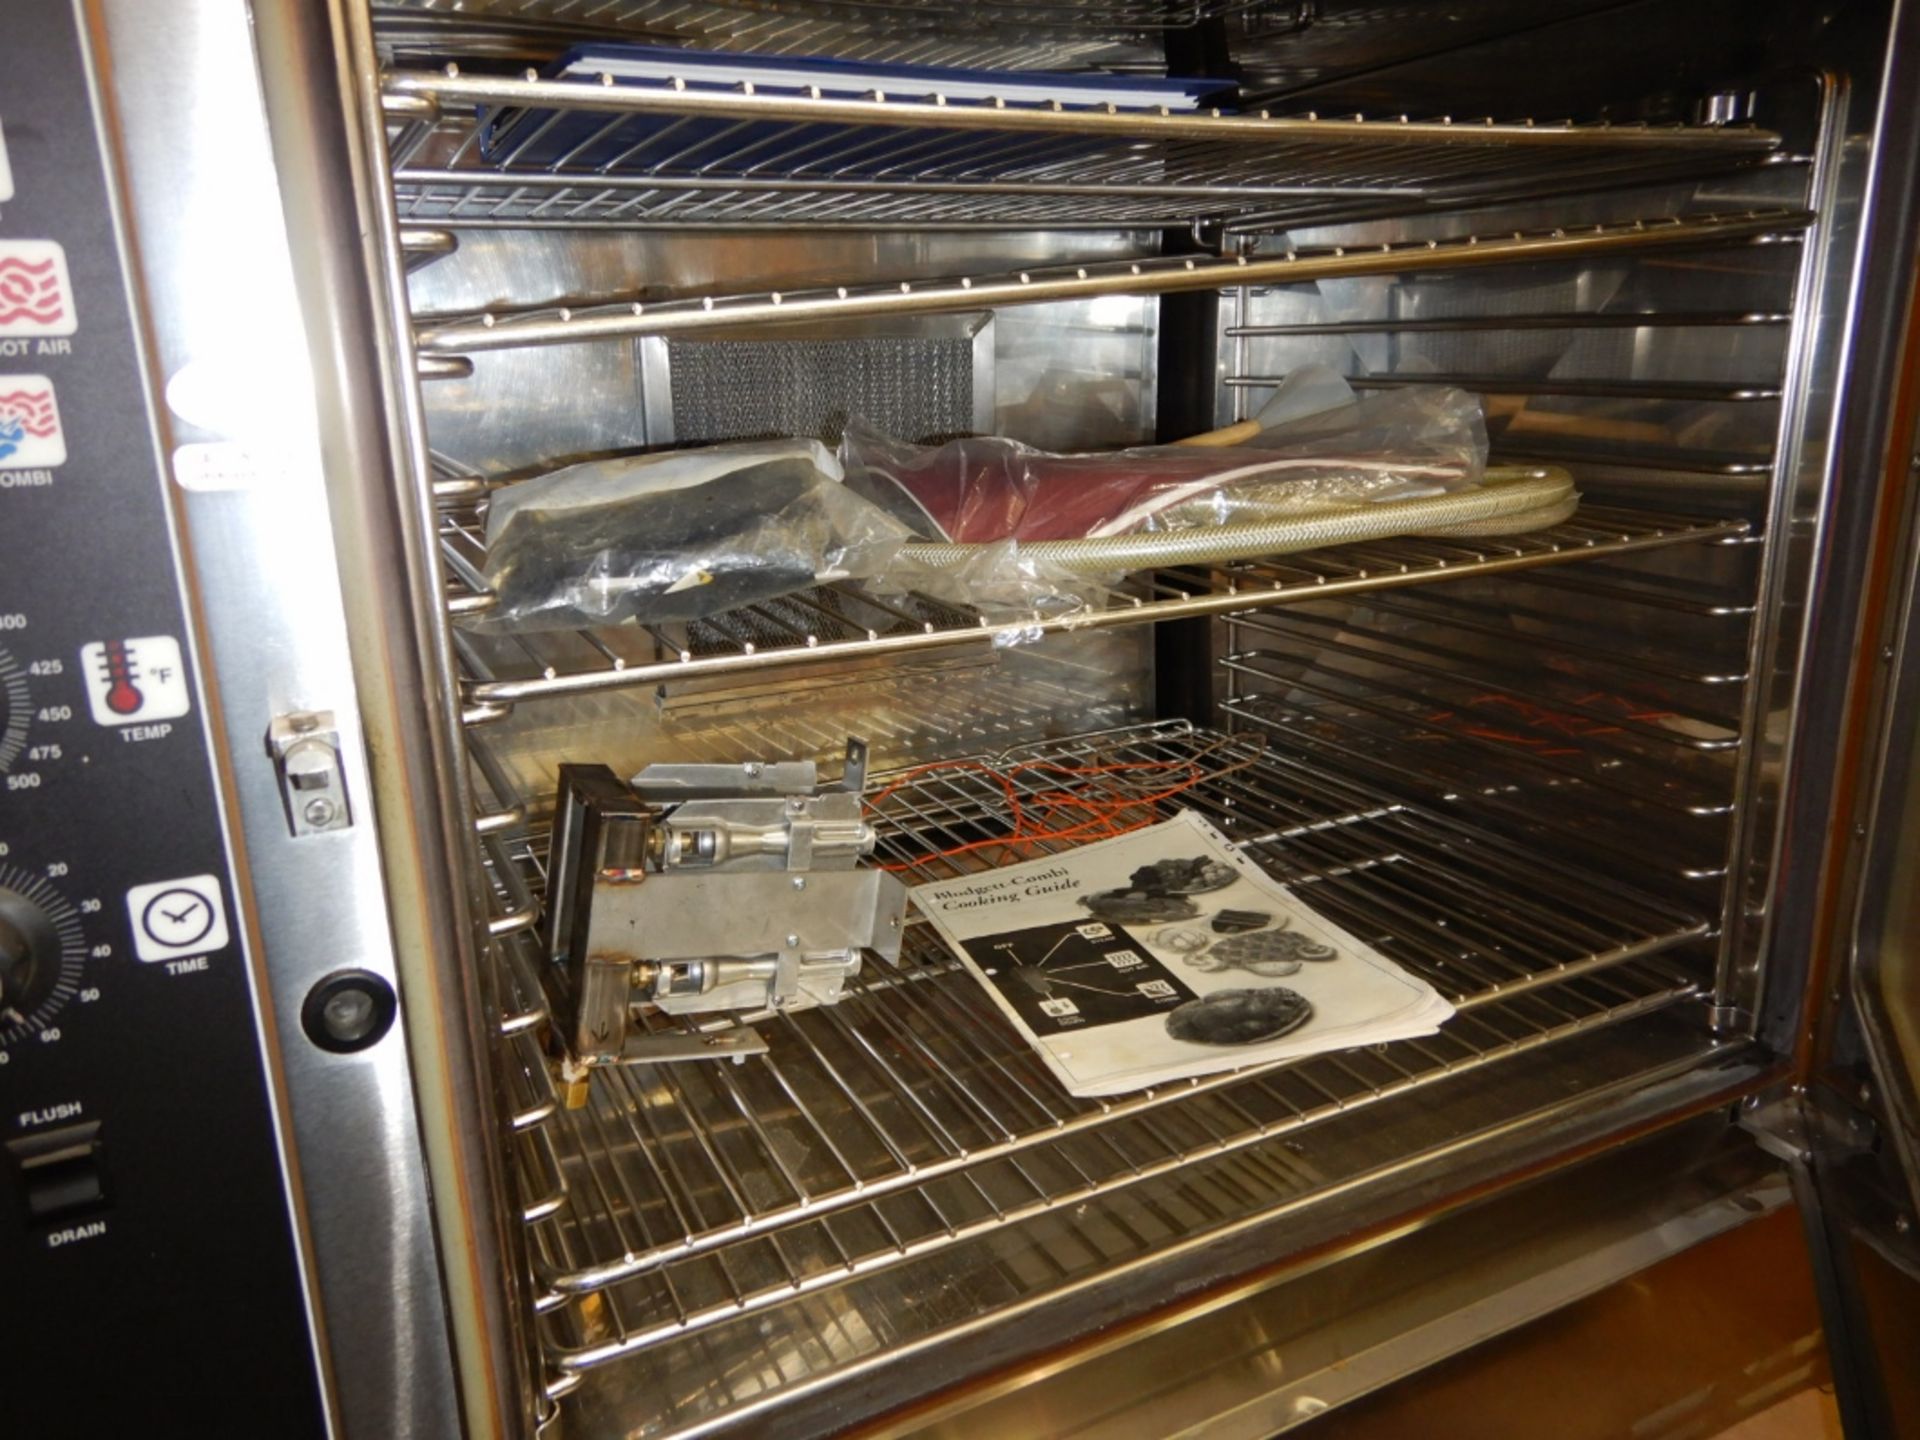 BLODGETT COMBI COS-8G CONVECTION OVEN/STEAMER NG, W/ STAINLESS STEEL STAND - Image 3 of 8